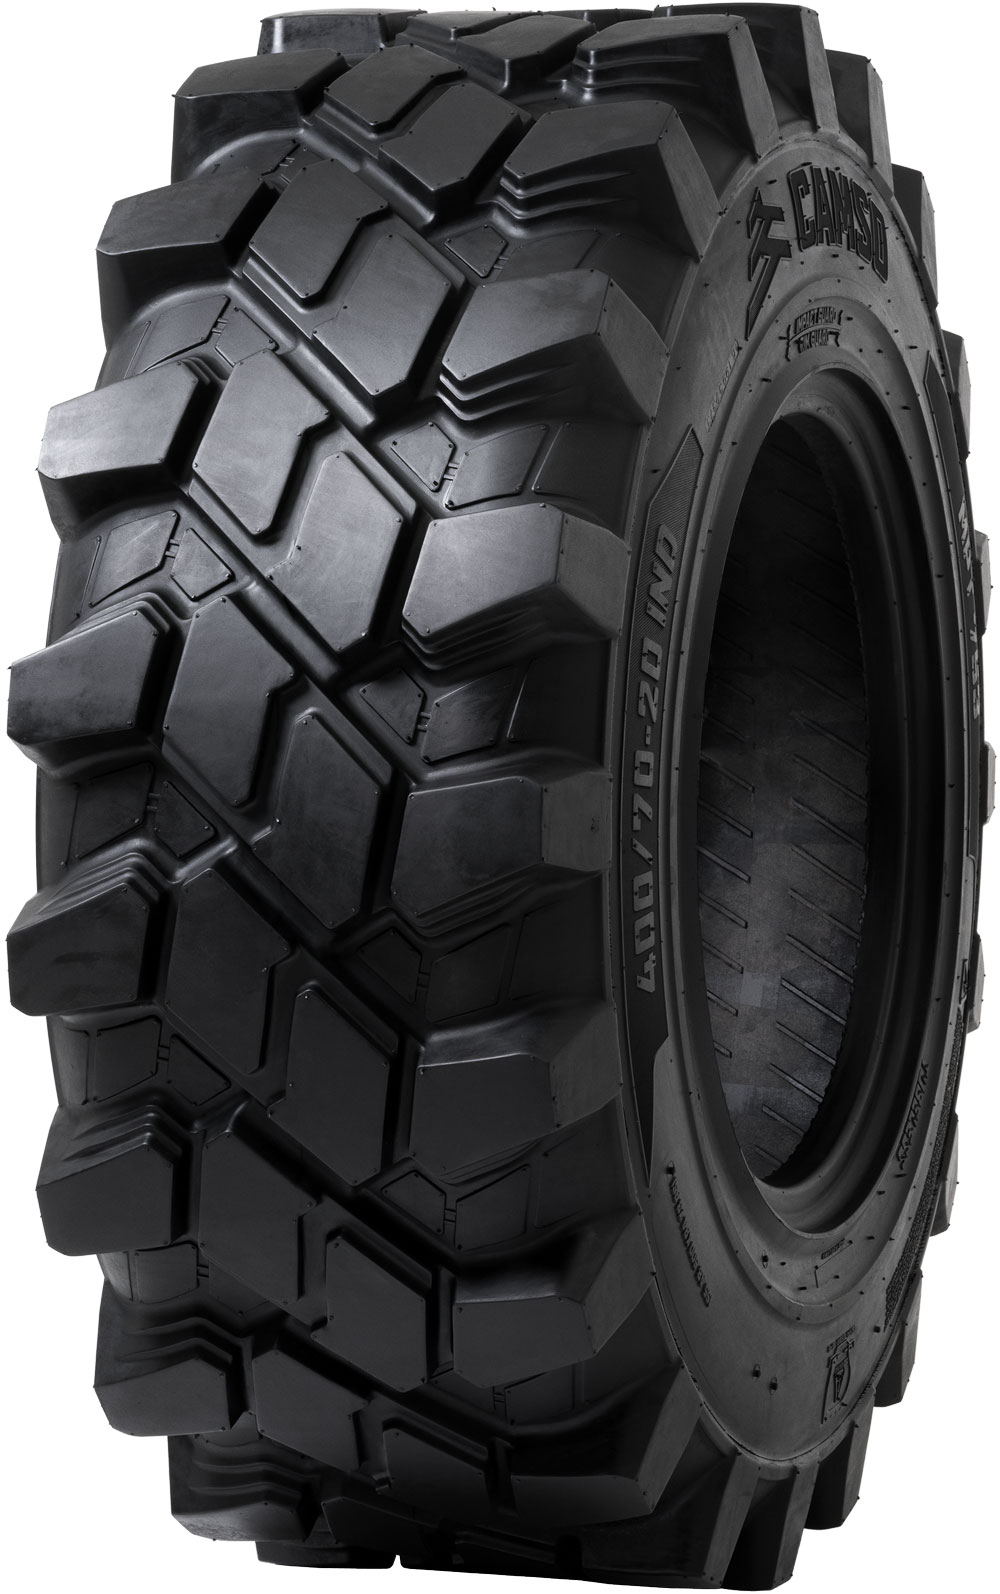 product_type-industrial_tires Camso MPT 753 TL 400/70 R24 400A